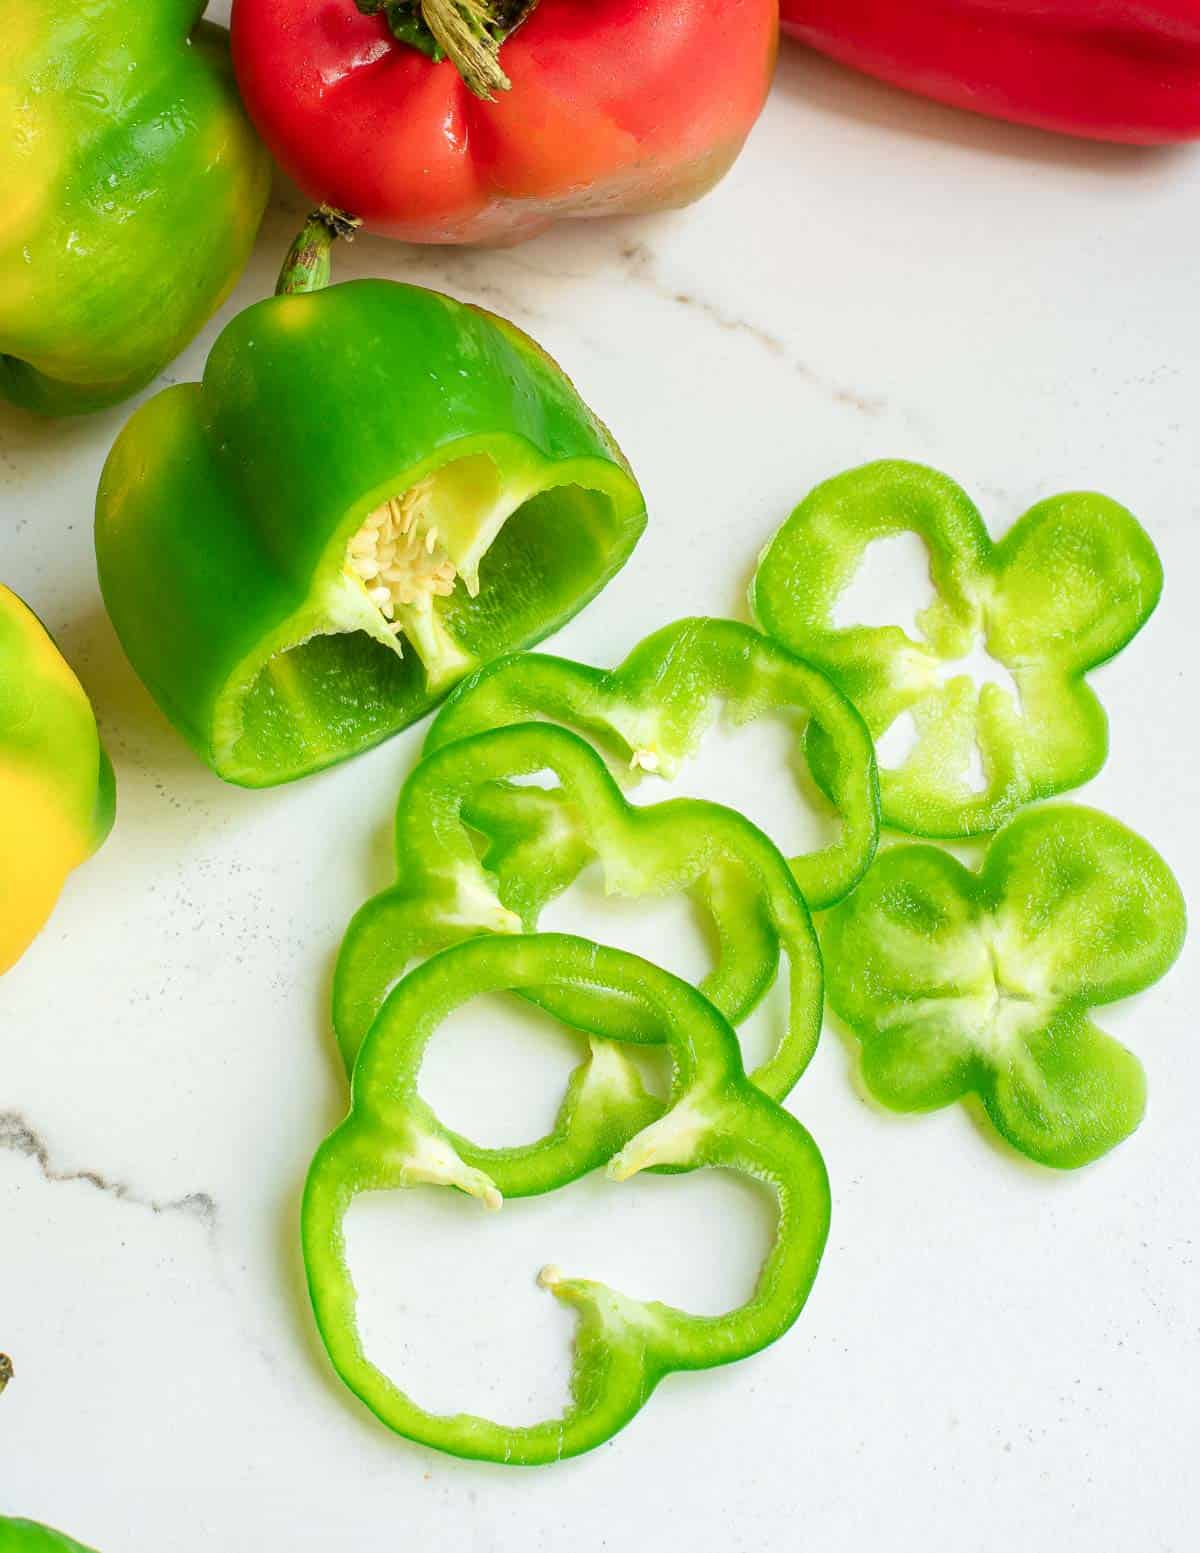 Green bell pepper cut into rings.